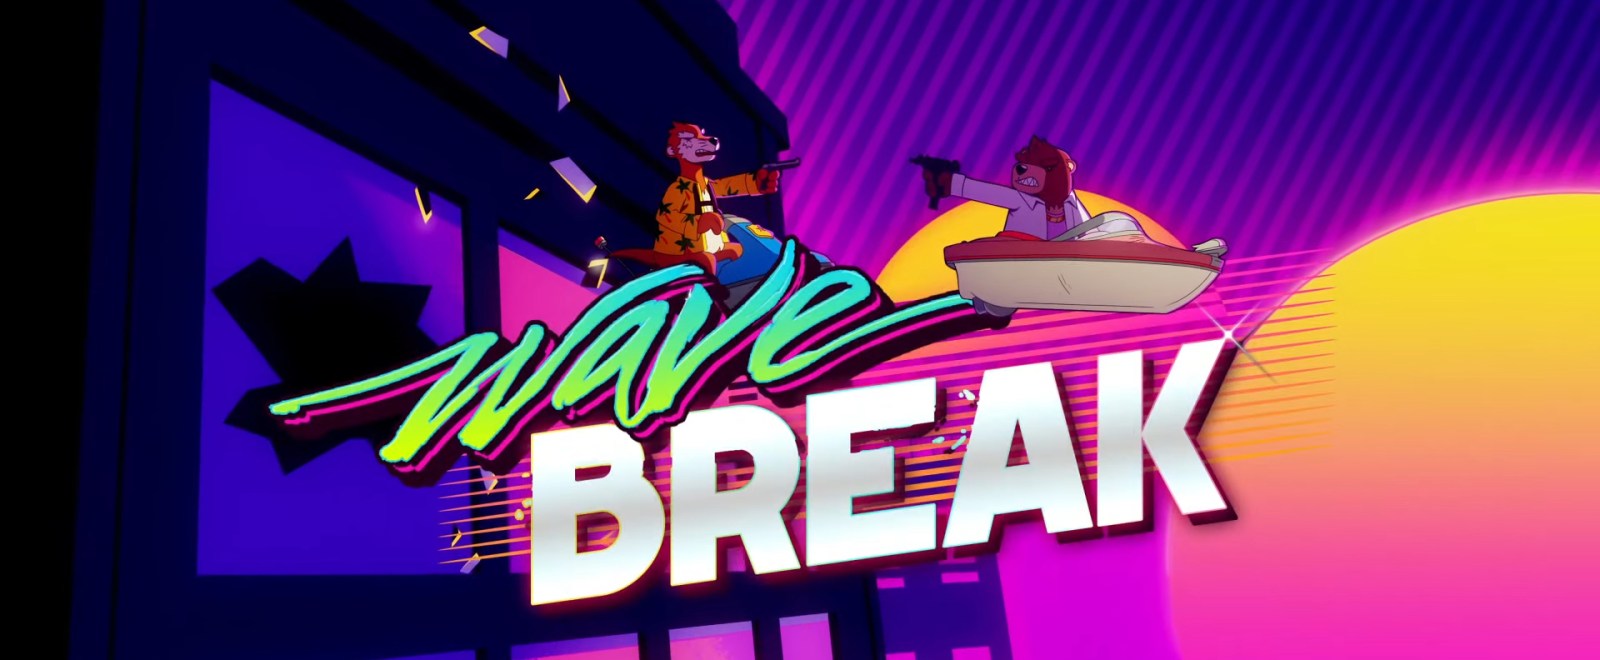 Wave Break Is The World S First Skateboating Game And It Looks Rad As Hell - youtube guillaume et kim brawl stars